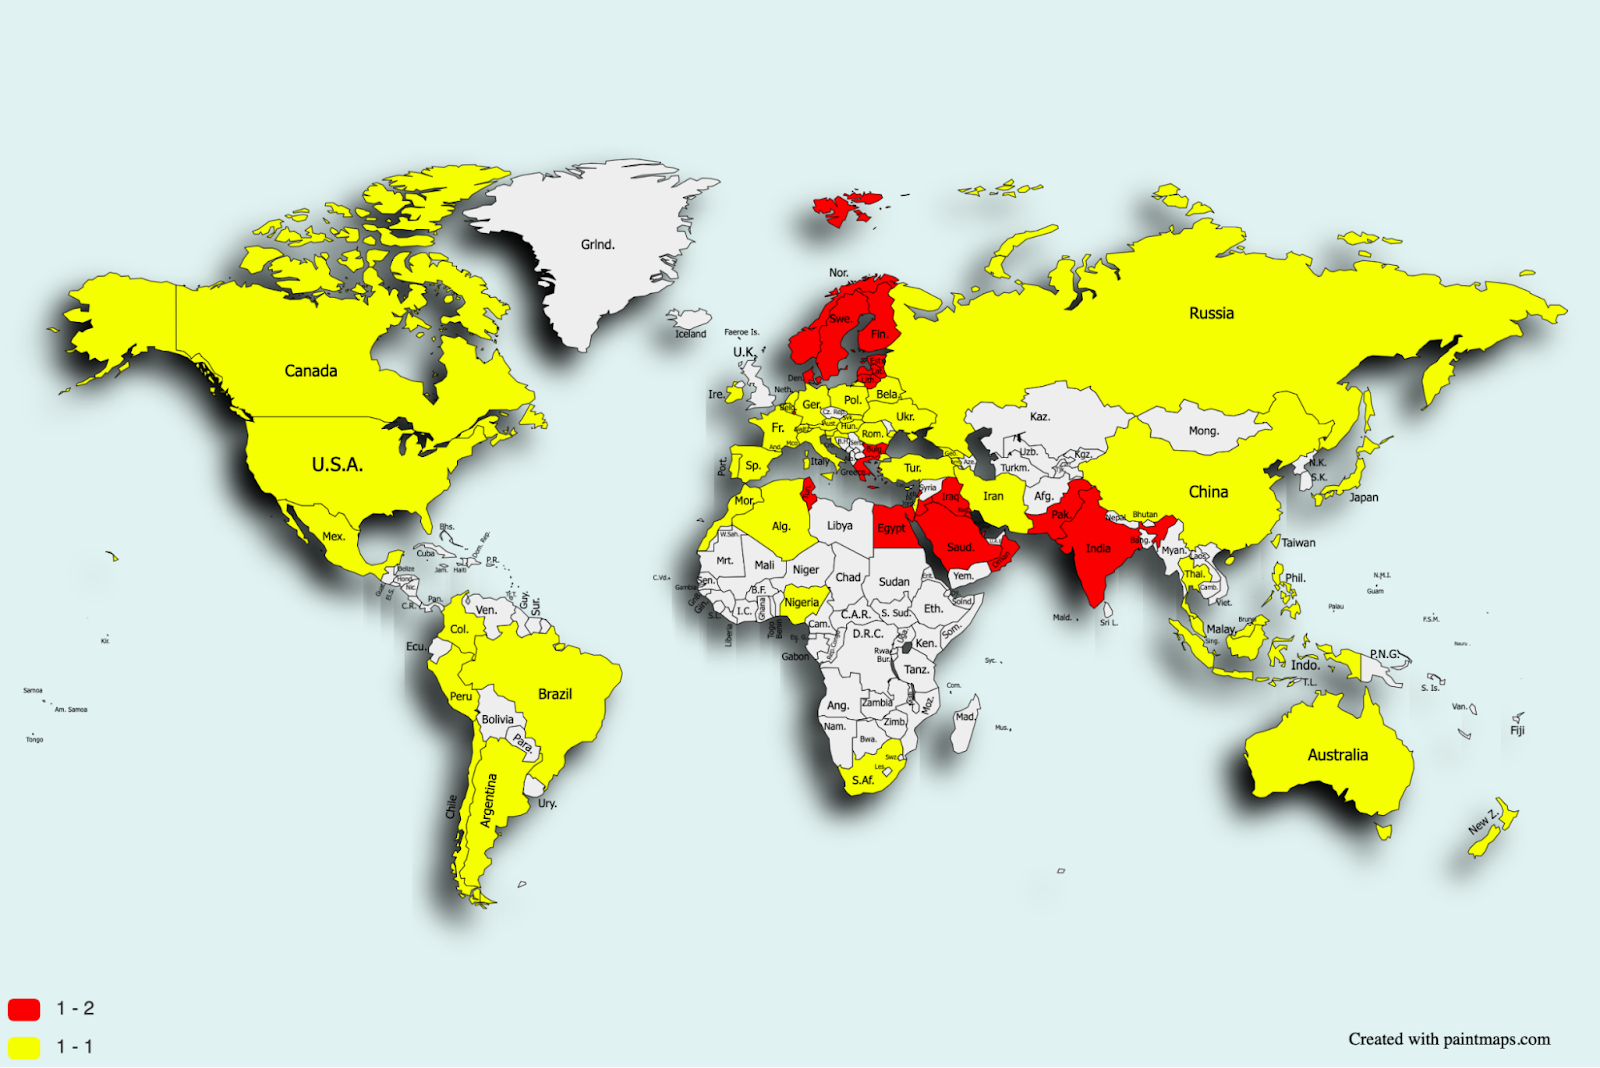 Map of the over 105 million potential victims spread across over 70 countries